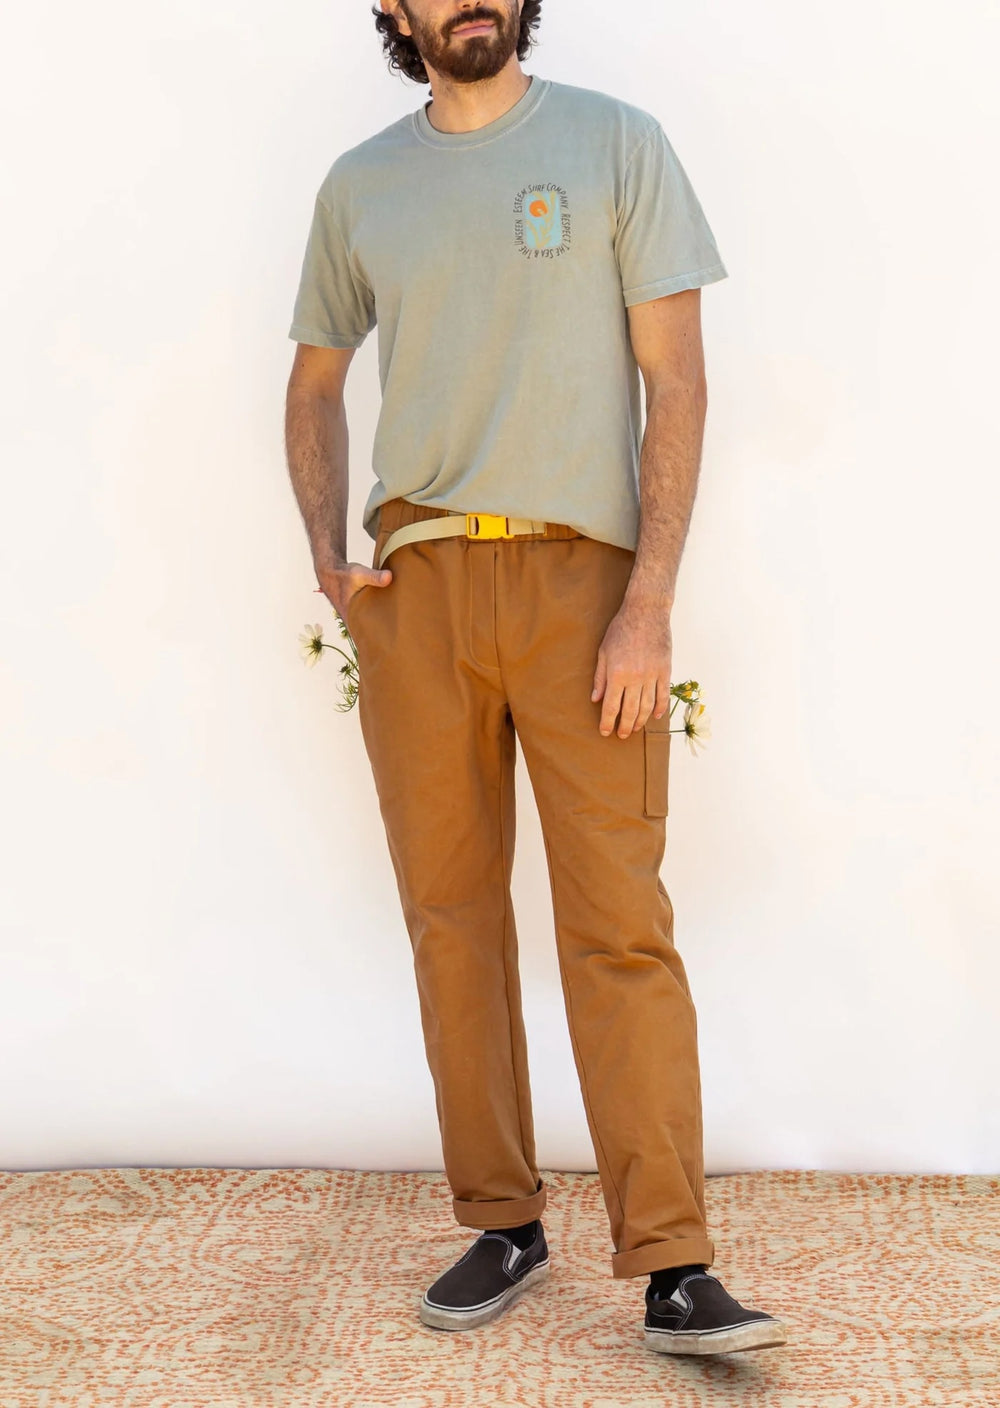 Man wearing the Men’s Rambler Pants sewing pattern from Friday Pattern Company on The Fold Line. A pull-on pants pattern made in denim, twill, or canvas fabric, featuring a relaxed fit, elastic waist with a built-in belt, faux fly, side and patch pockets,